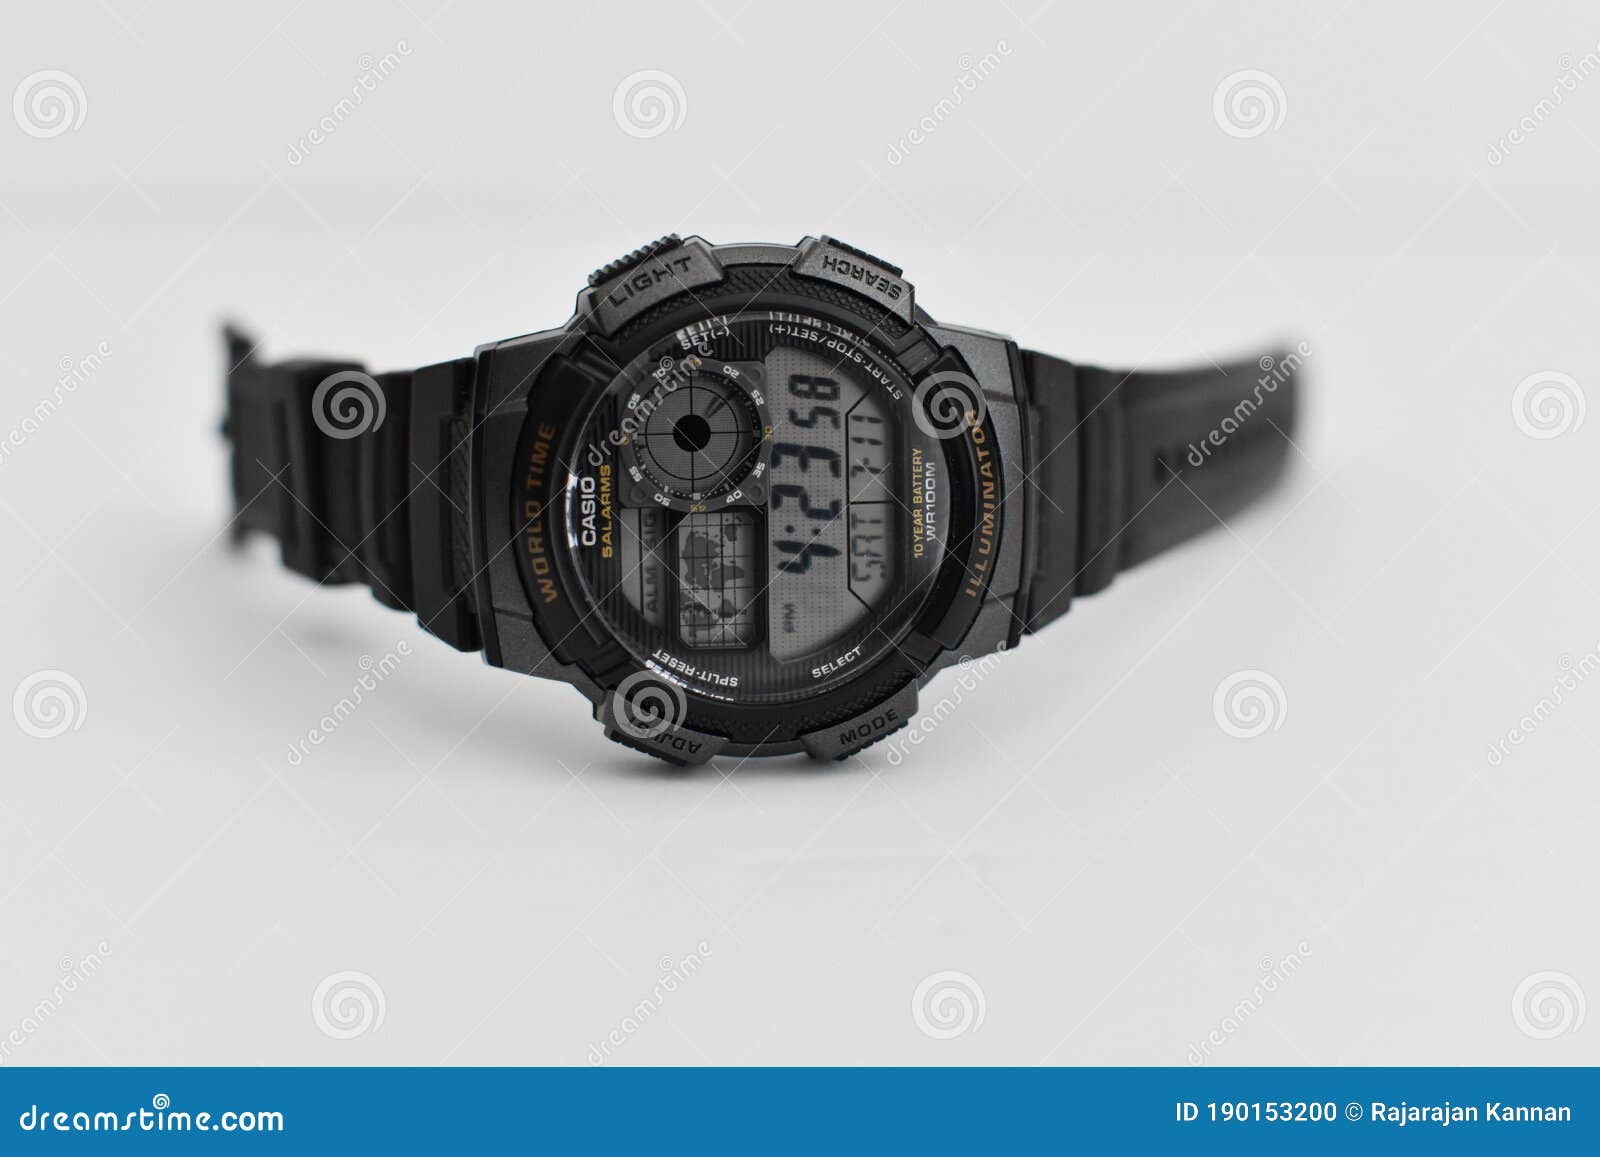 127 Digital Casio Photos Free Royalty Free Stock Photos From Dreamstime